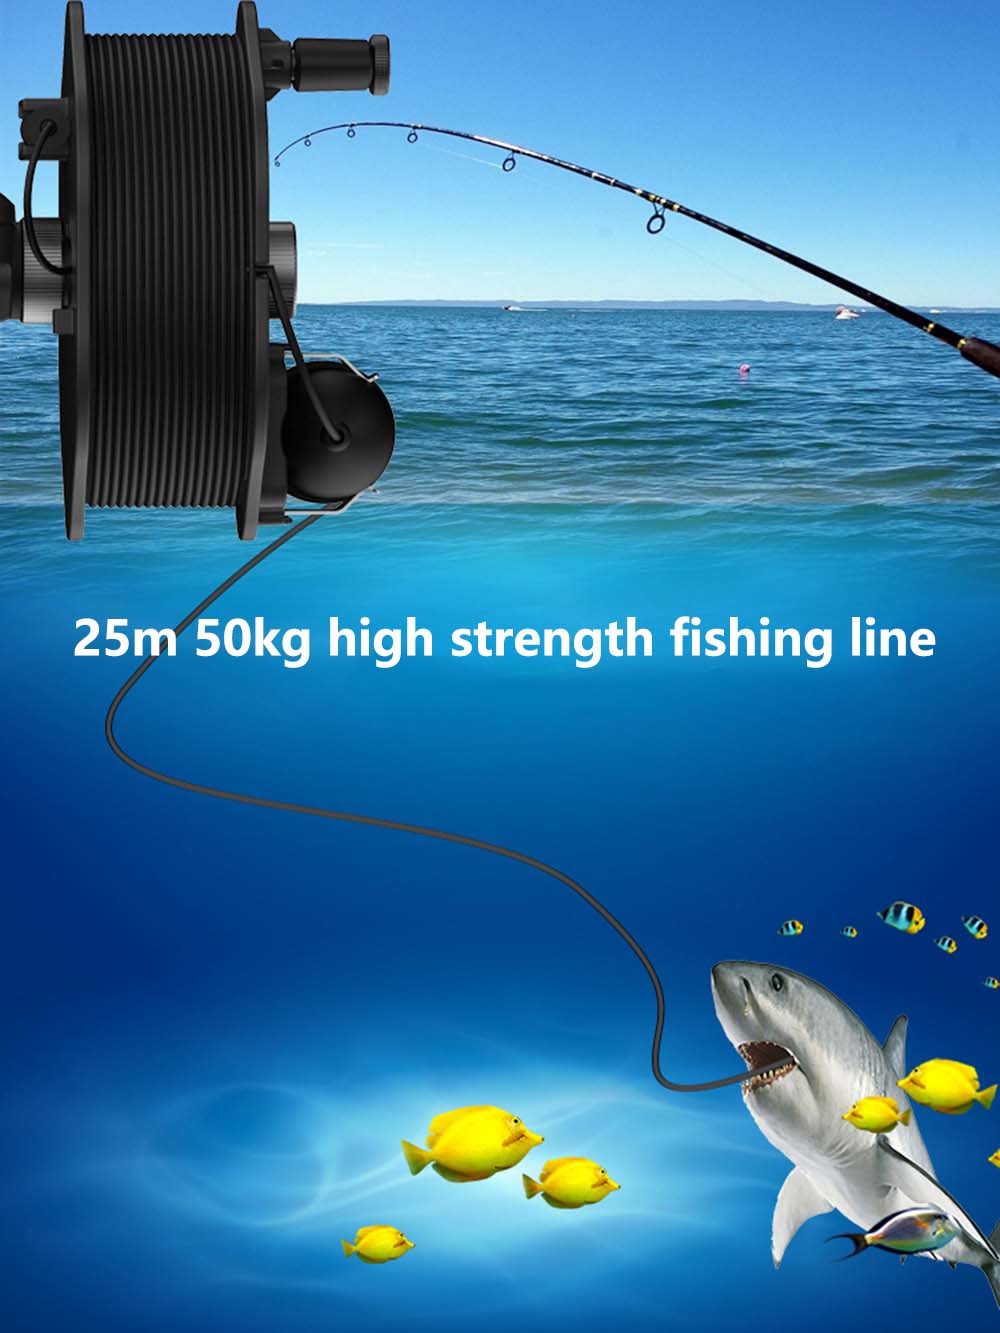 ZANLURE-20M-Infrared-Night-Vision-Underwater-Fishing-Finder-Portable-Waterproof-Fishing-Camera-With--1930402-2